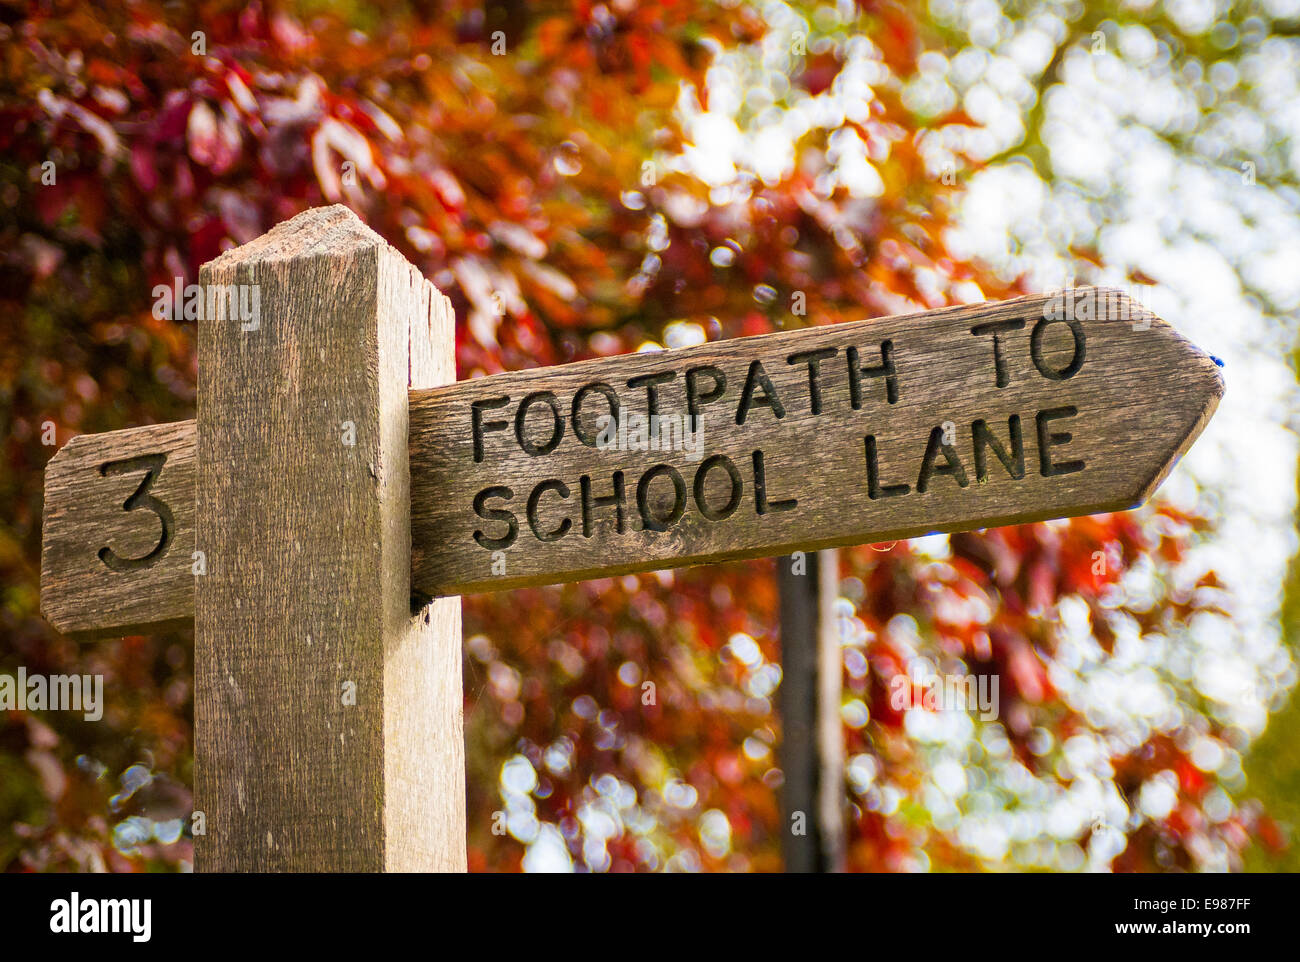 A wooden sign post points to the footpath for School Lane Stock Photo